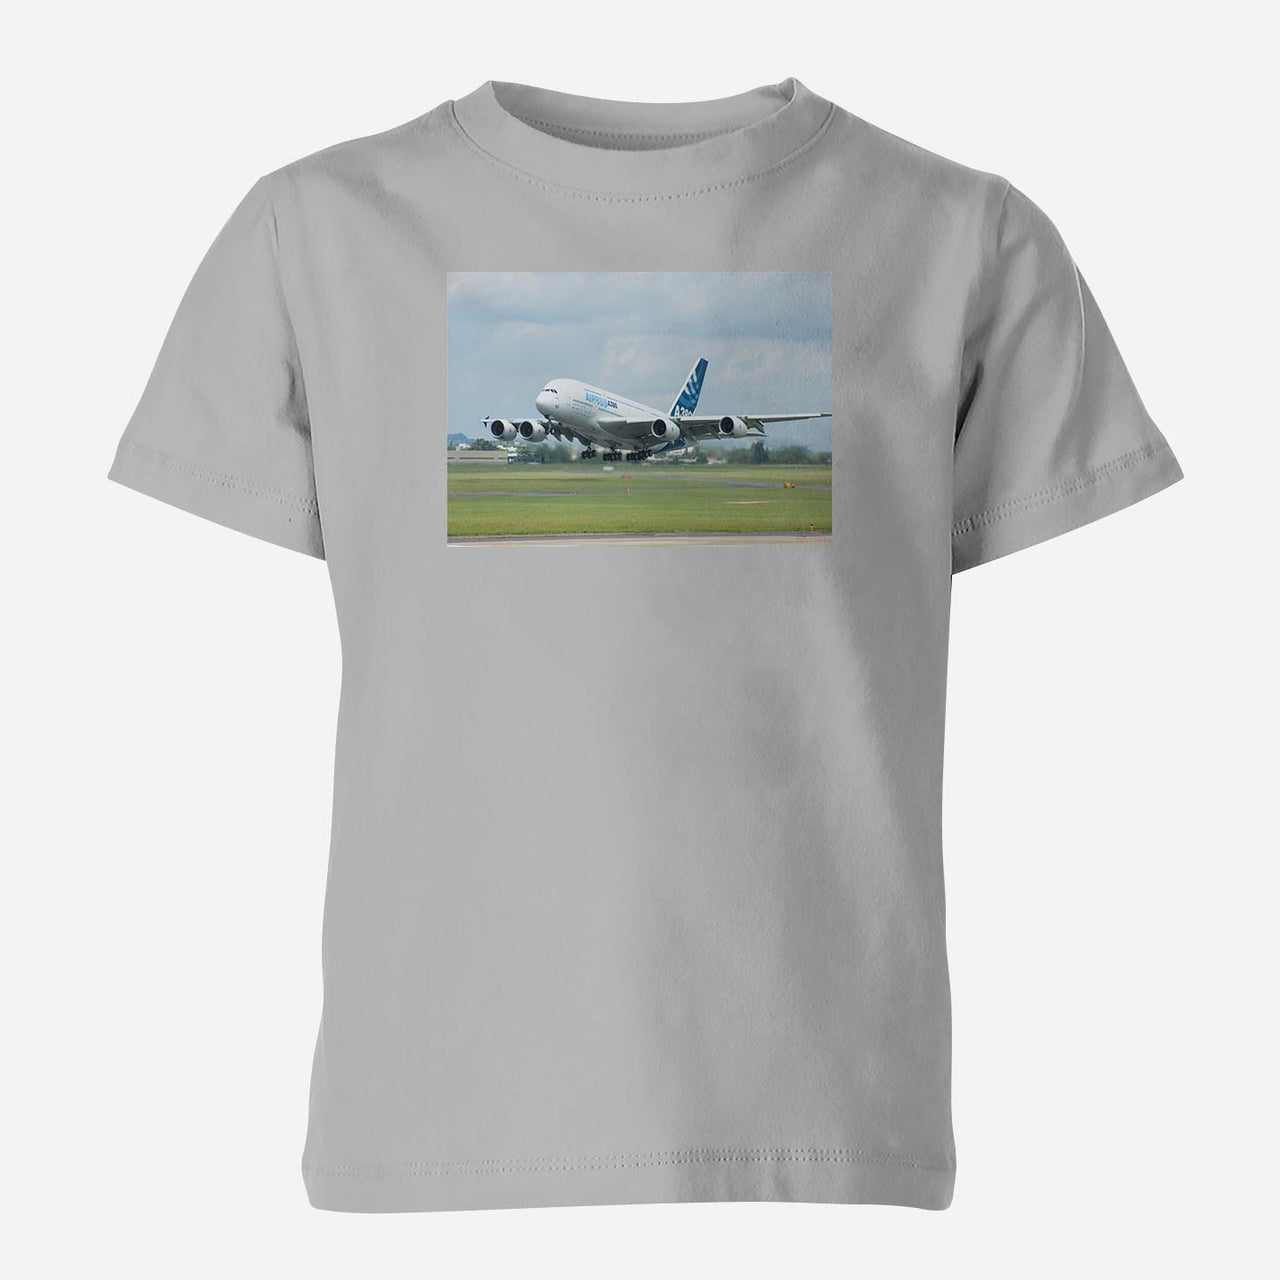 Departing Airbus A380 with Original Livery Designed Children T-Shirts